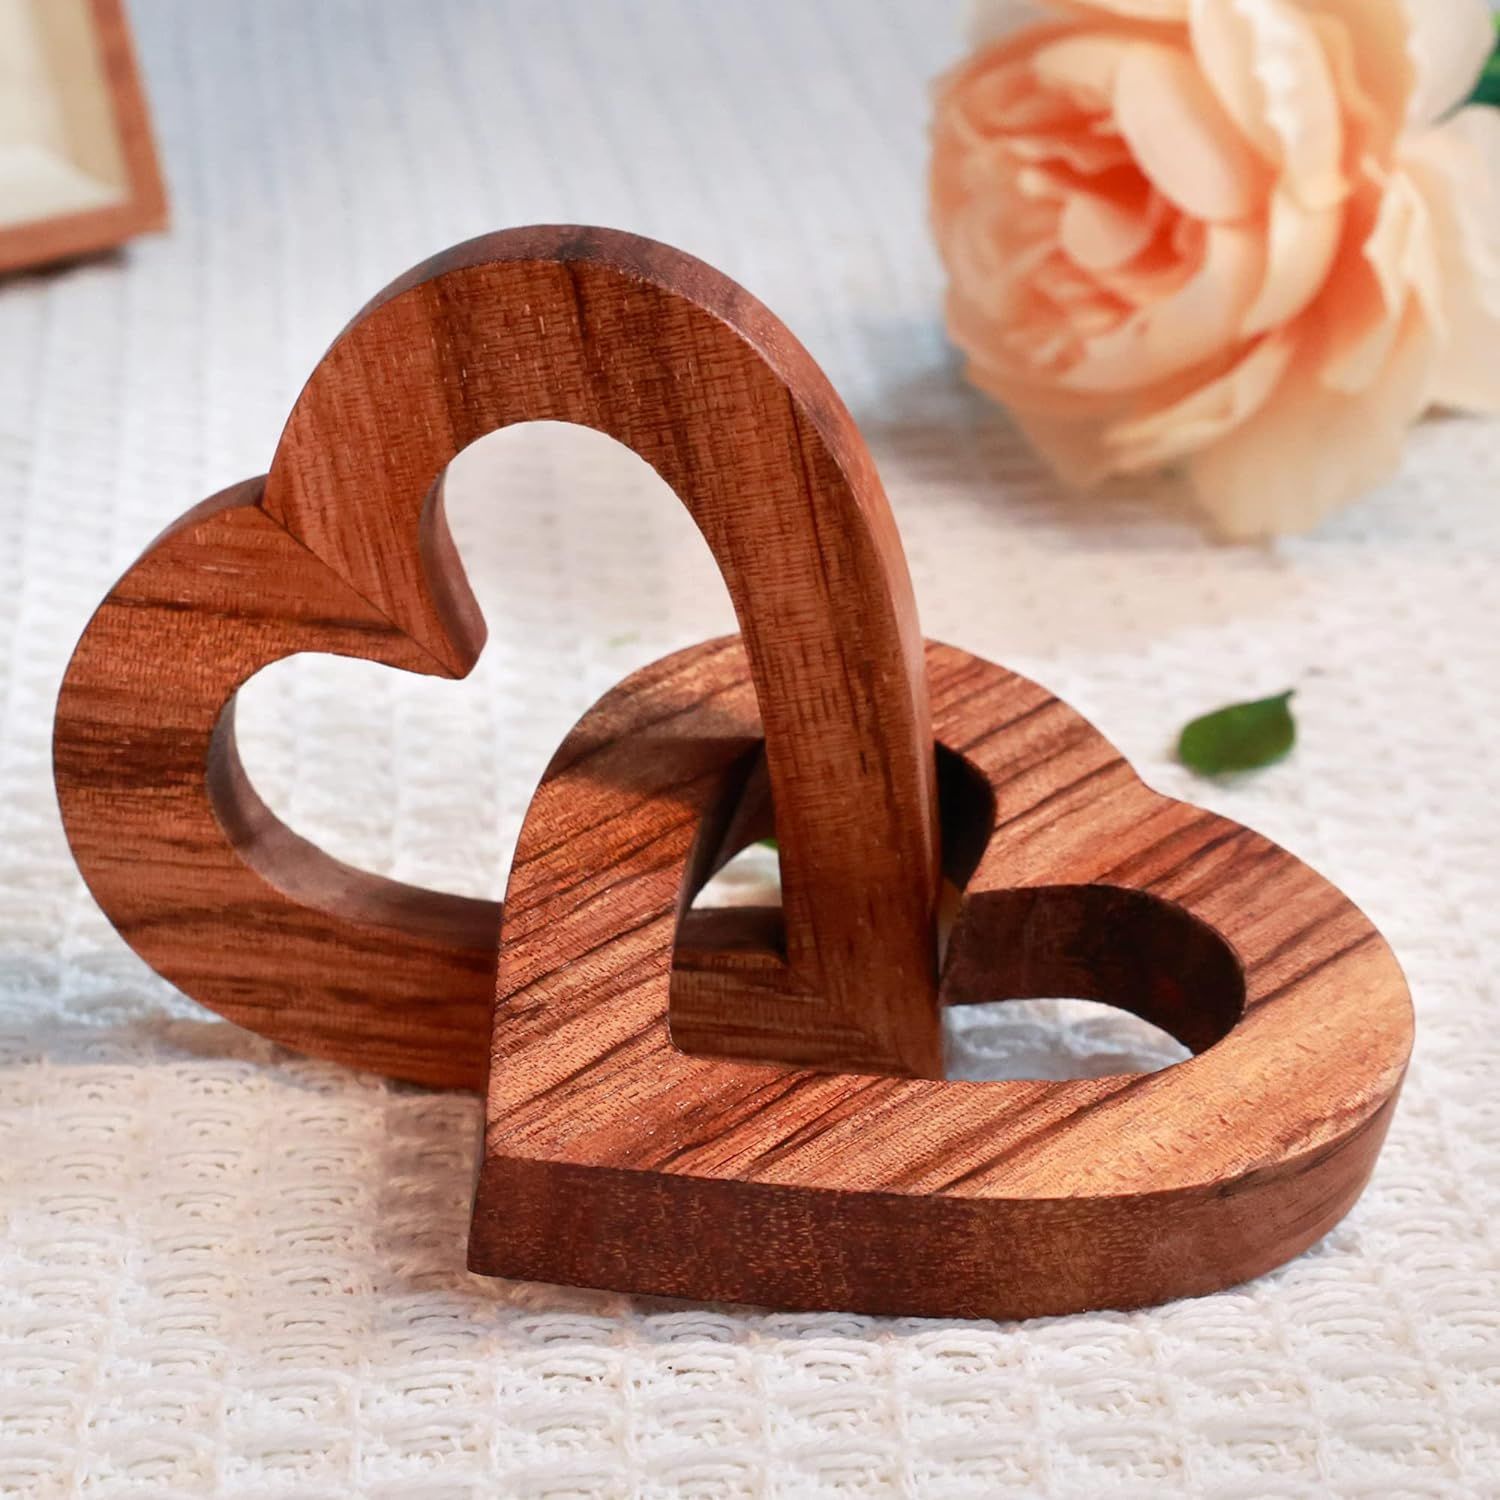 Valentine's Day Romantic Heart Gifts for Her, Handmade Wood Hearts Shape for Couple Wife Husband ... | Amazon (CA)